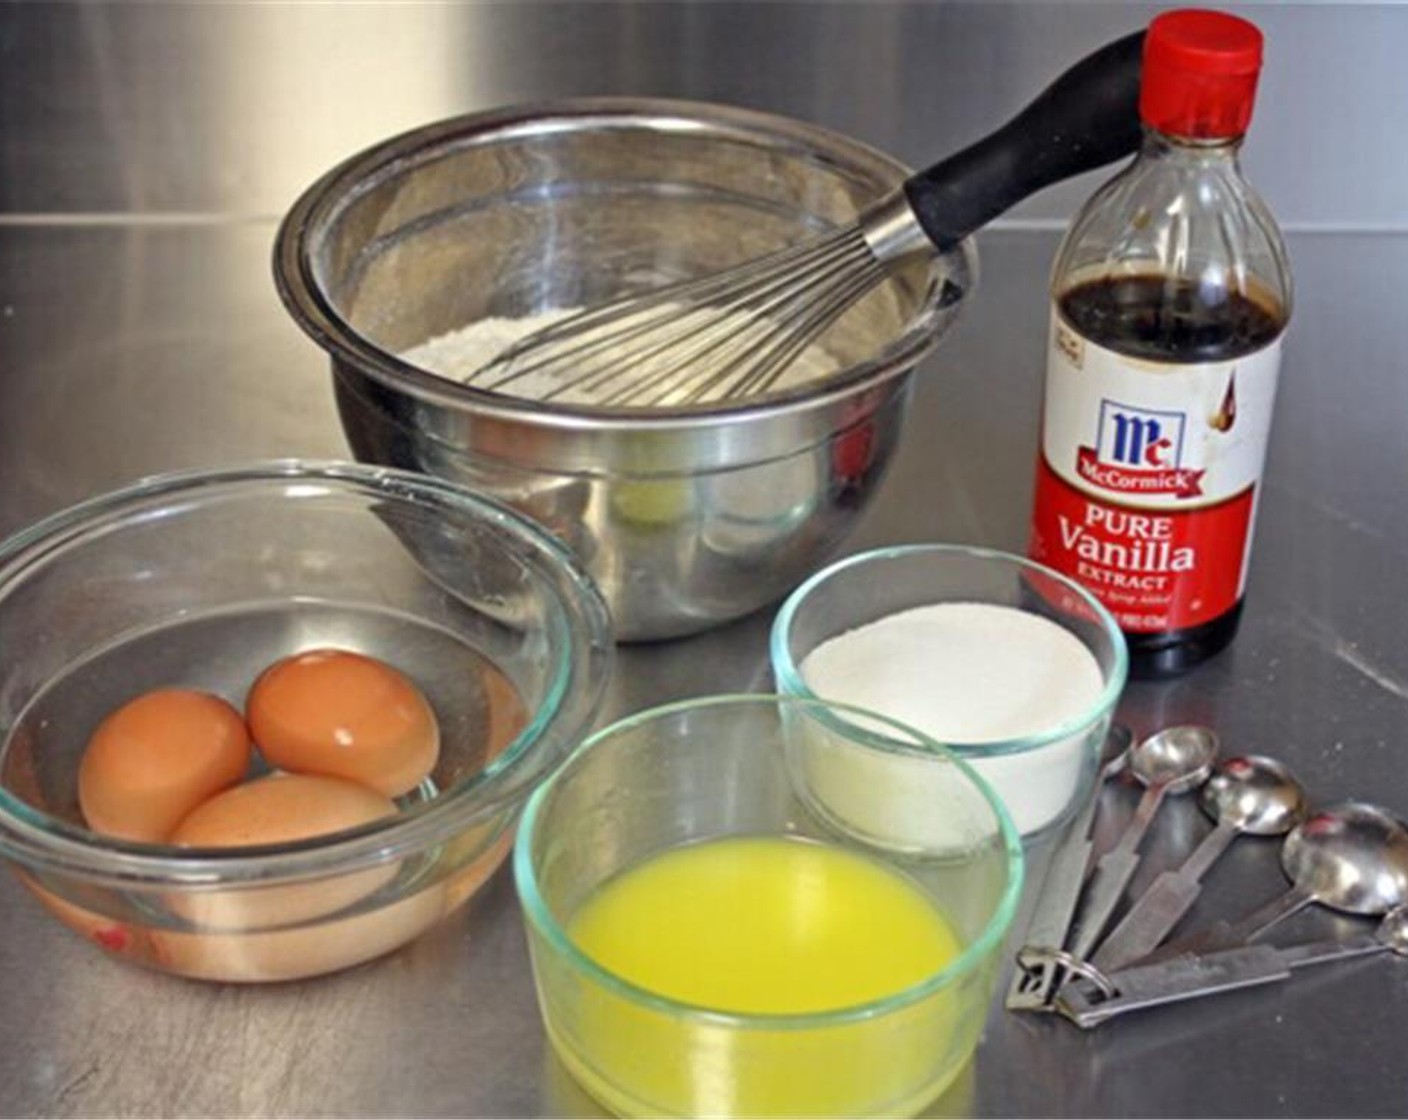 step 4 To make the cookie batter first preheat your pizzelle iron. Sift the All-Purpose Flour (2 cups), Baking Powder (1 Tbsp) and Ground Cinnamon (1/2 Tbsp) into a mixing bowl. Add the Salt (1/8 tsp) and whisk well to combine, set aside.